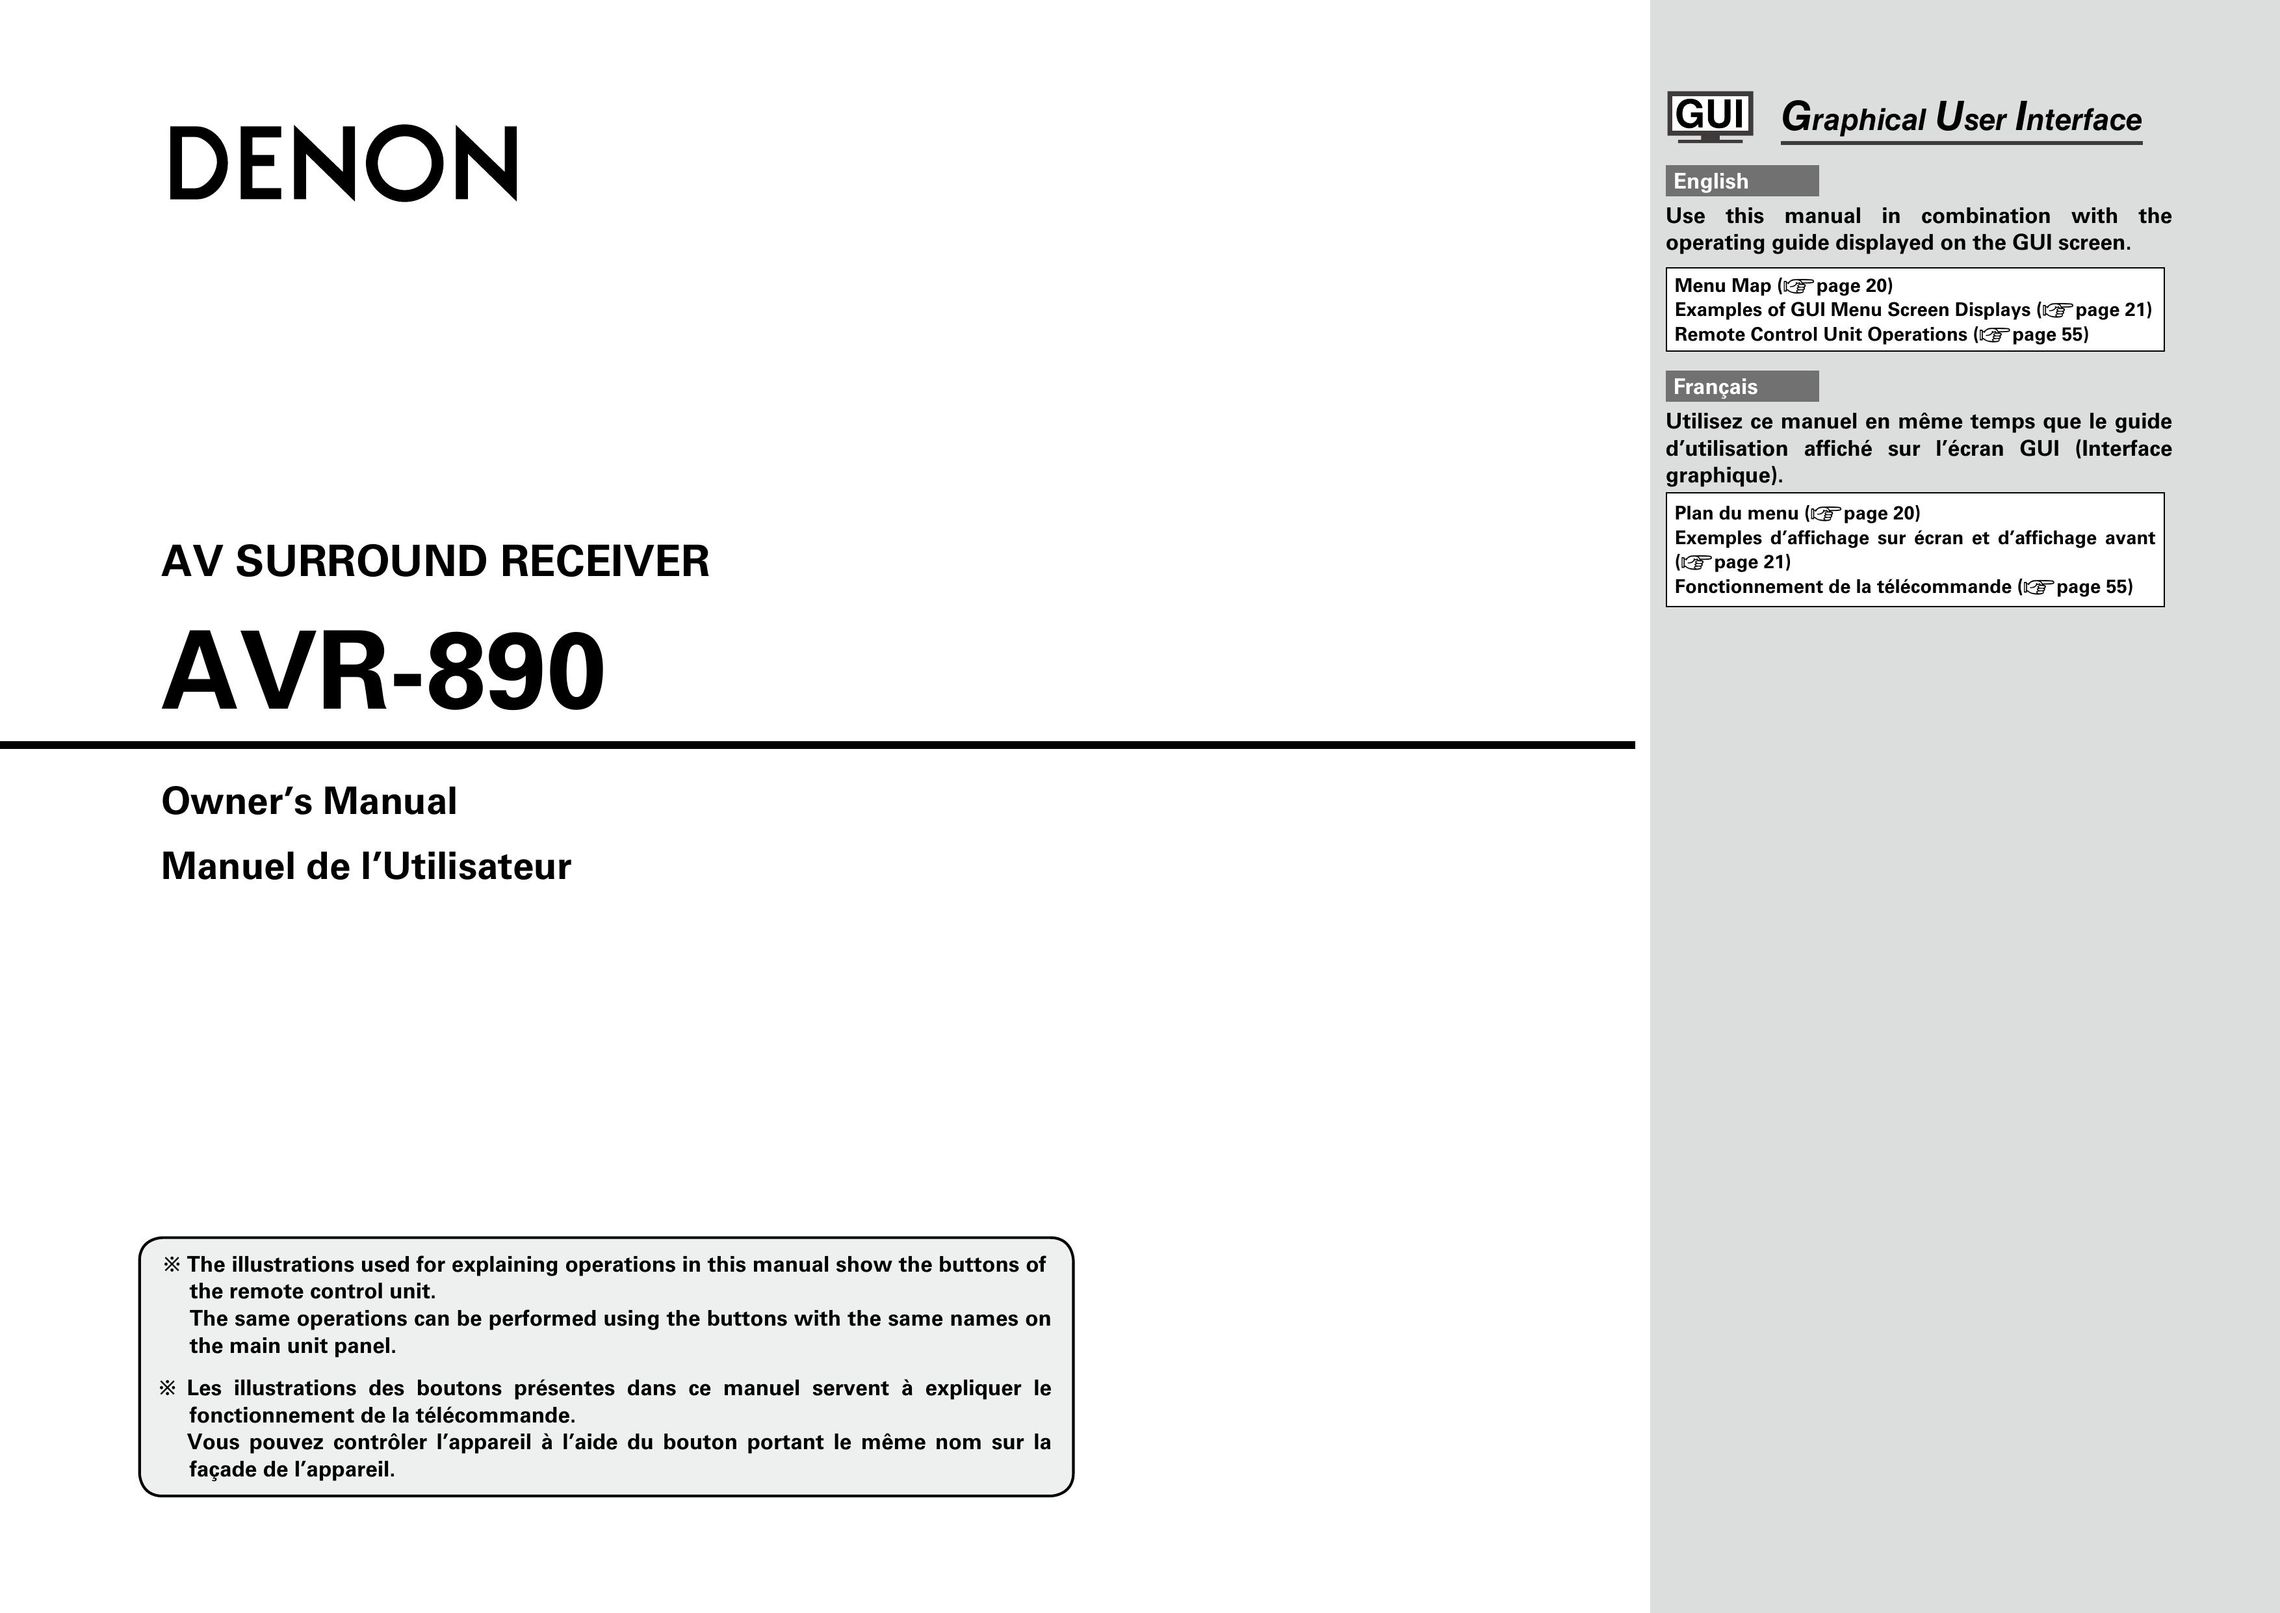 Denon AVR-890 Home Theater System User Manual